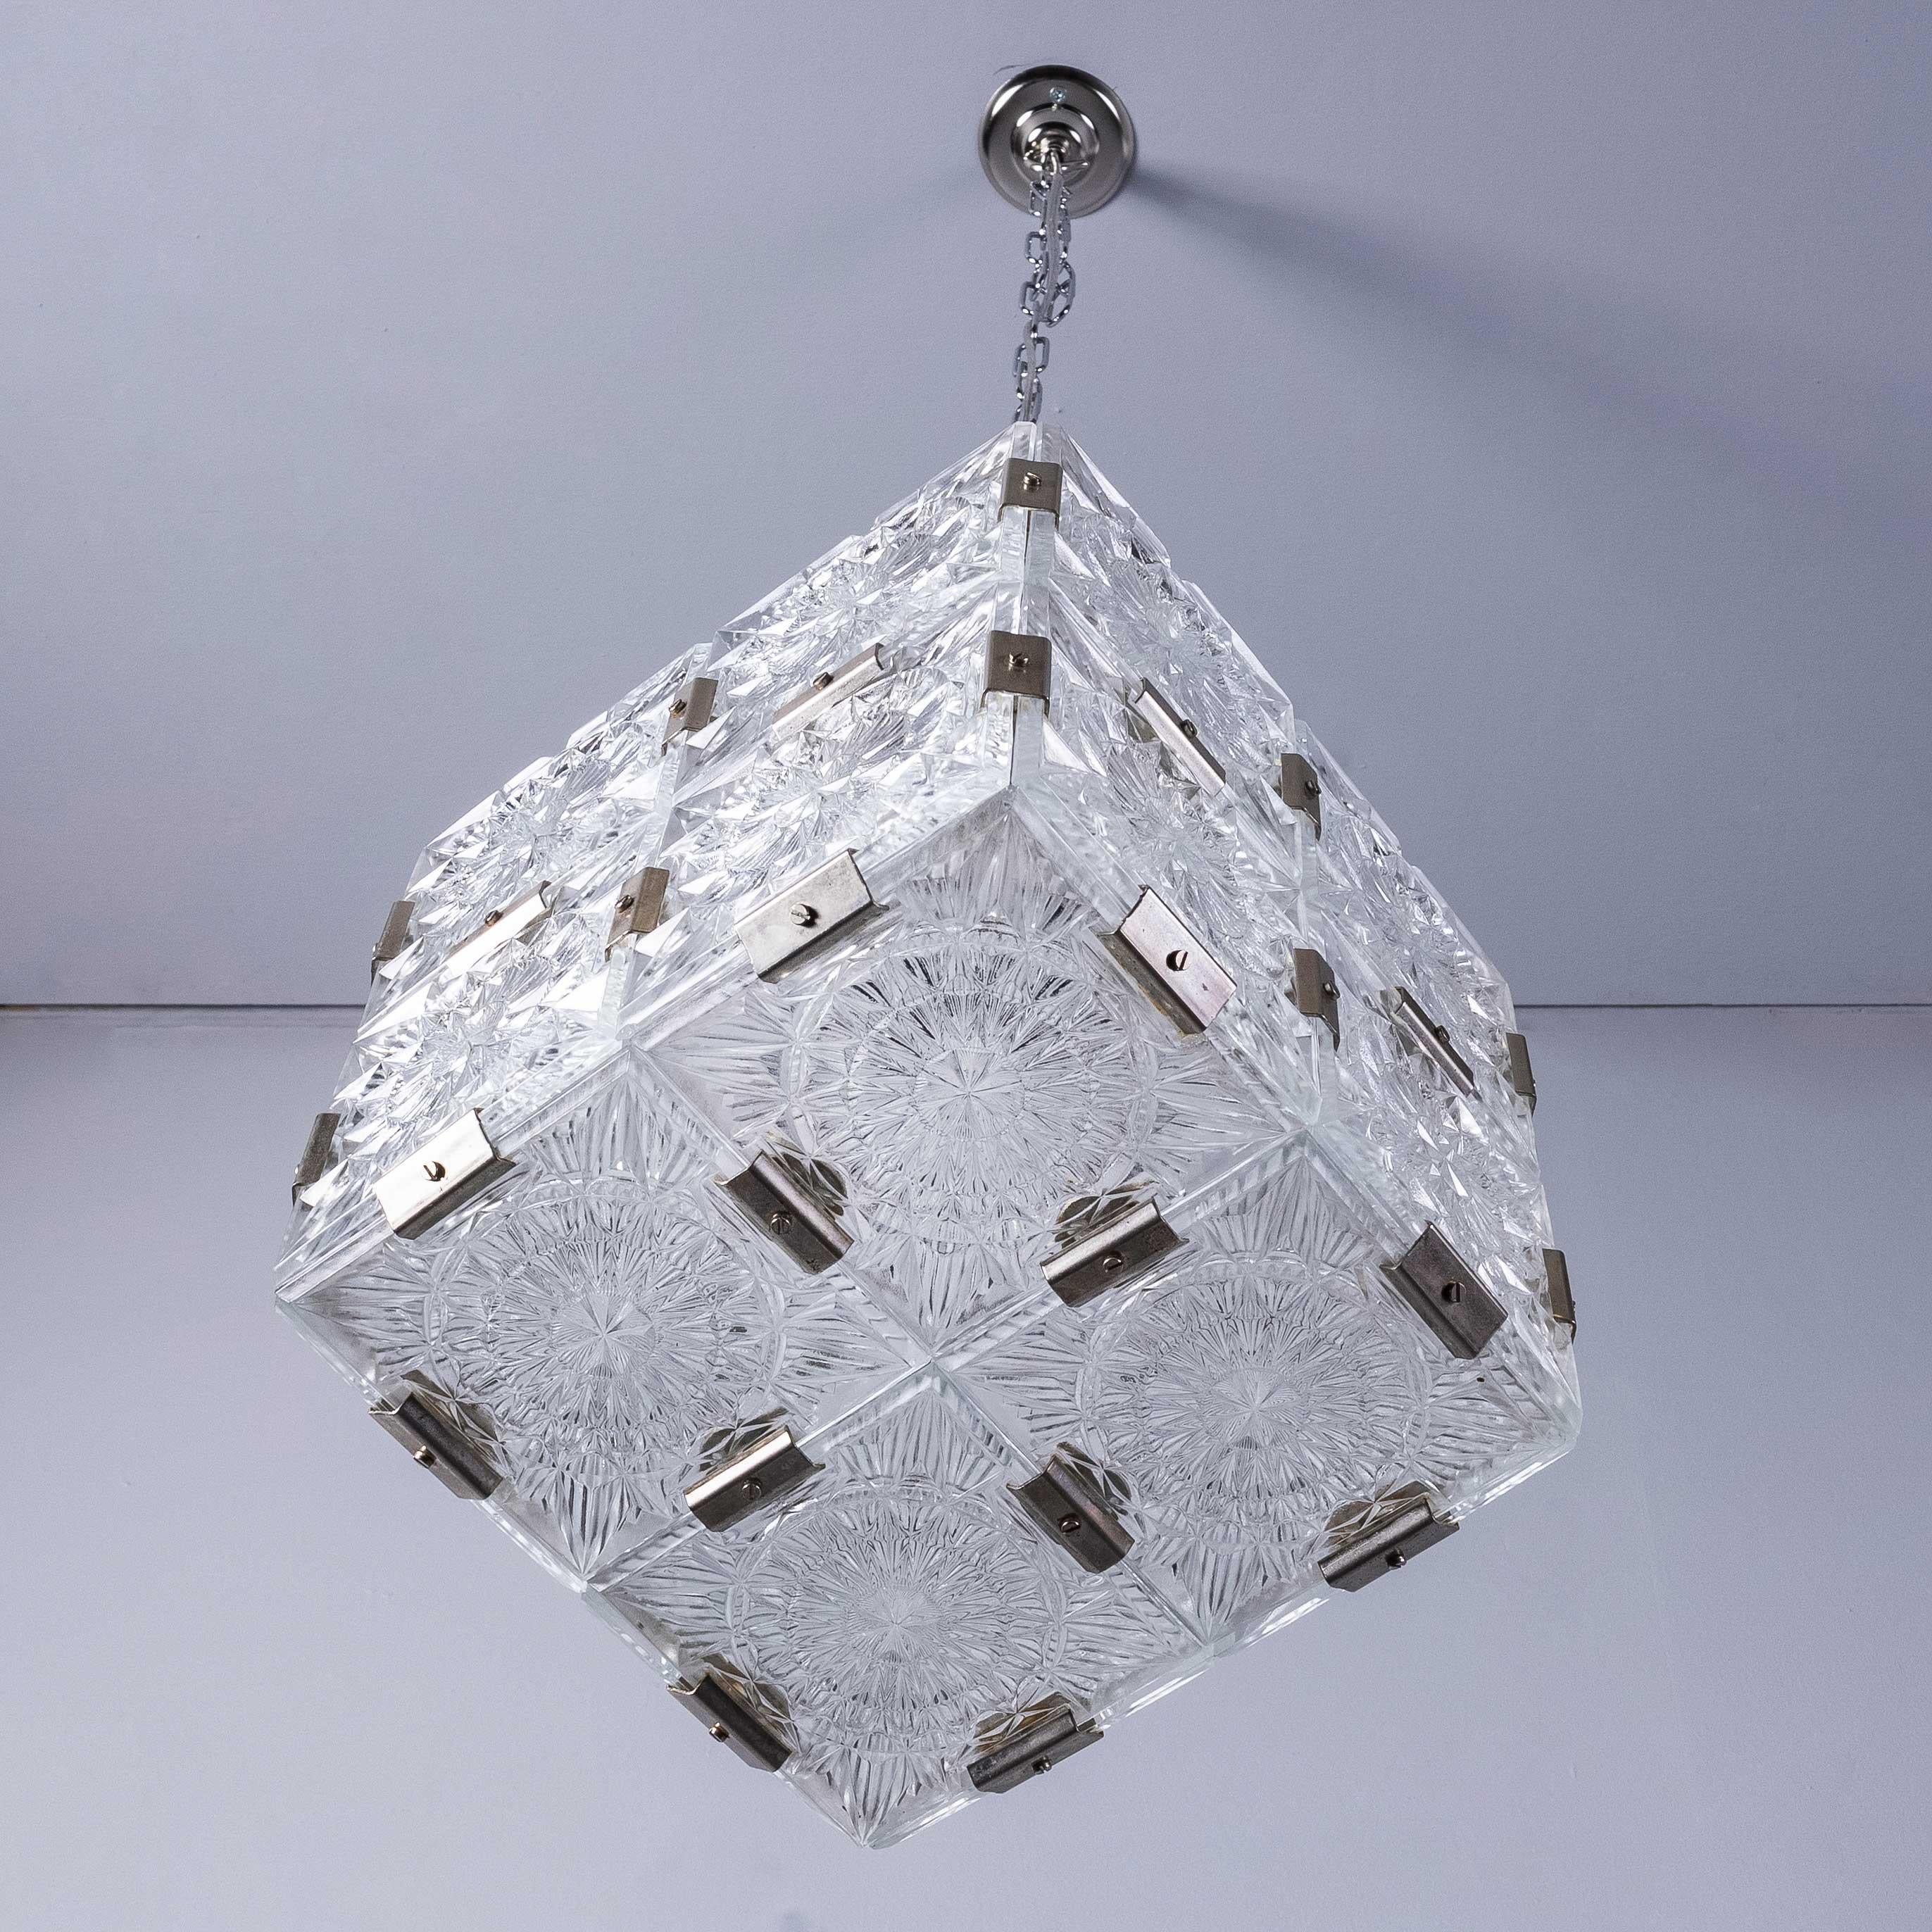 1960’s Cast Glass Cube Pendant Lamps
1950’s Cast Glass Cube Pendant Lamps. Extraordinary cast glass lamps hand cut in the Czech republic using the mottled sixties patterns. The Czech republic has a rich international history of glass production